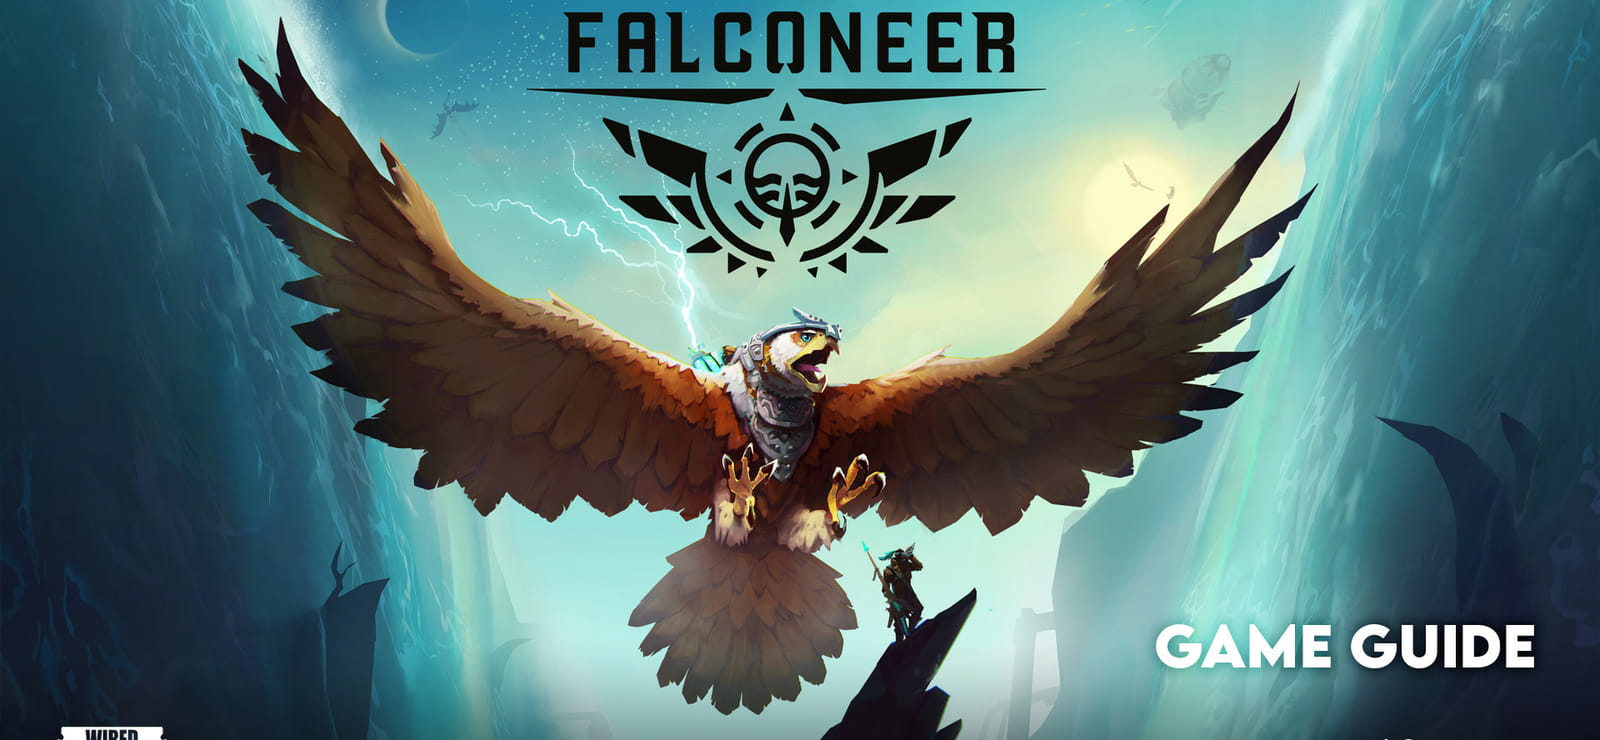 The Falconeer Game Guide